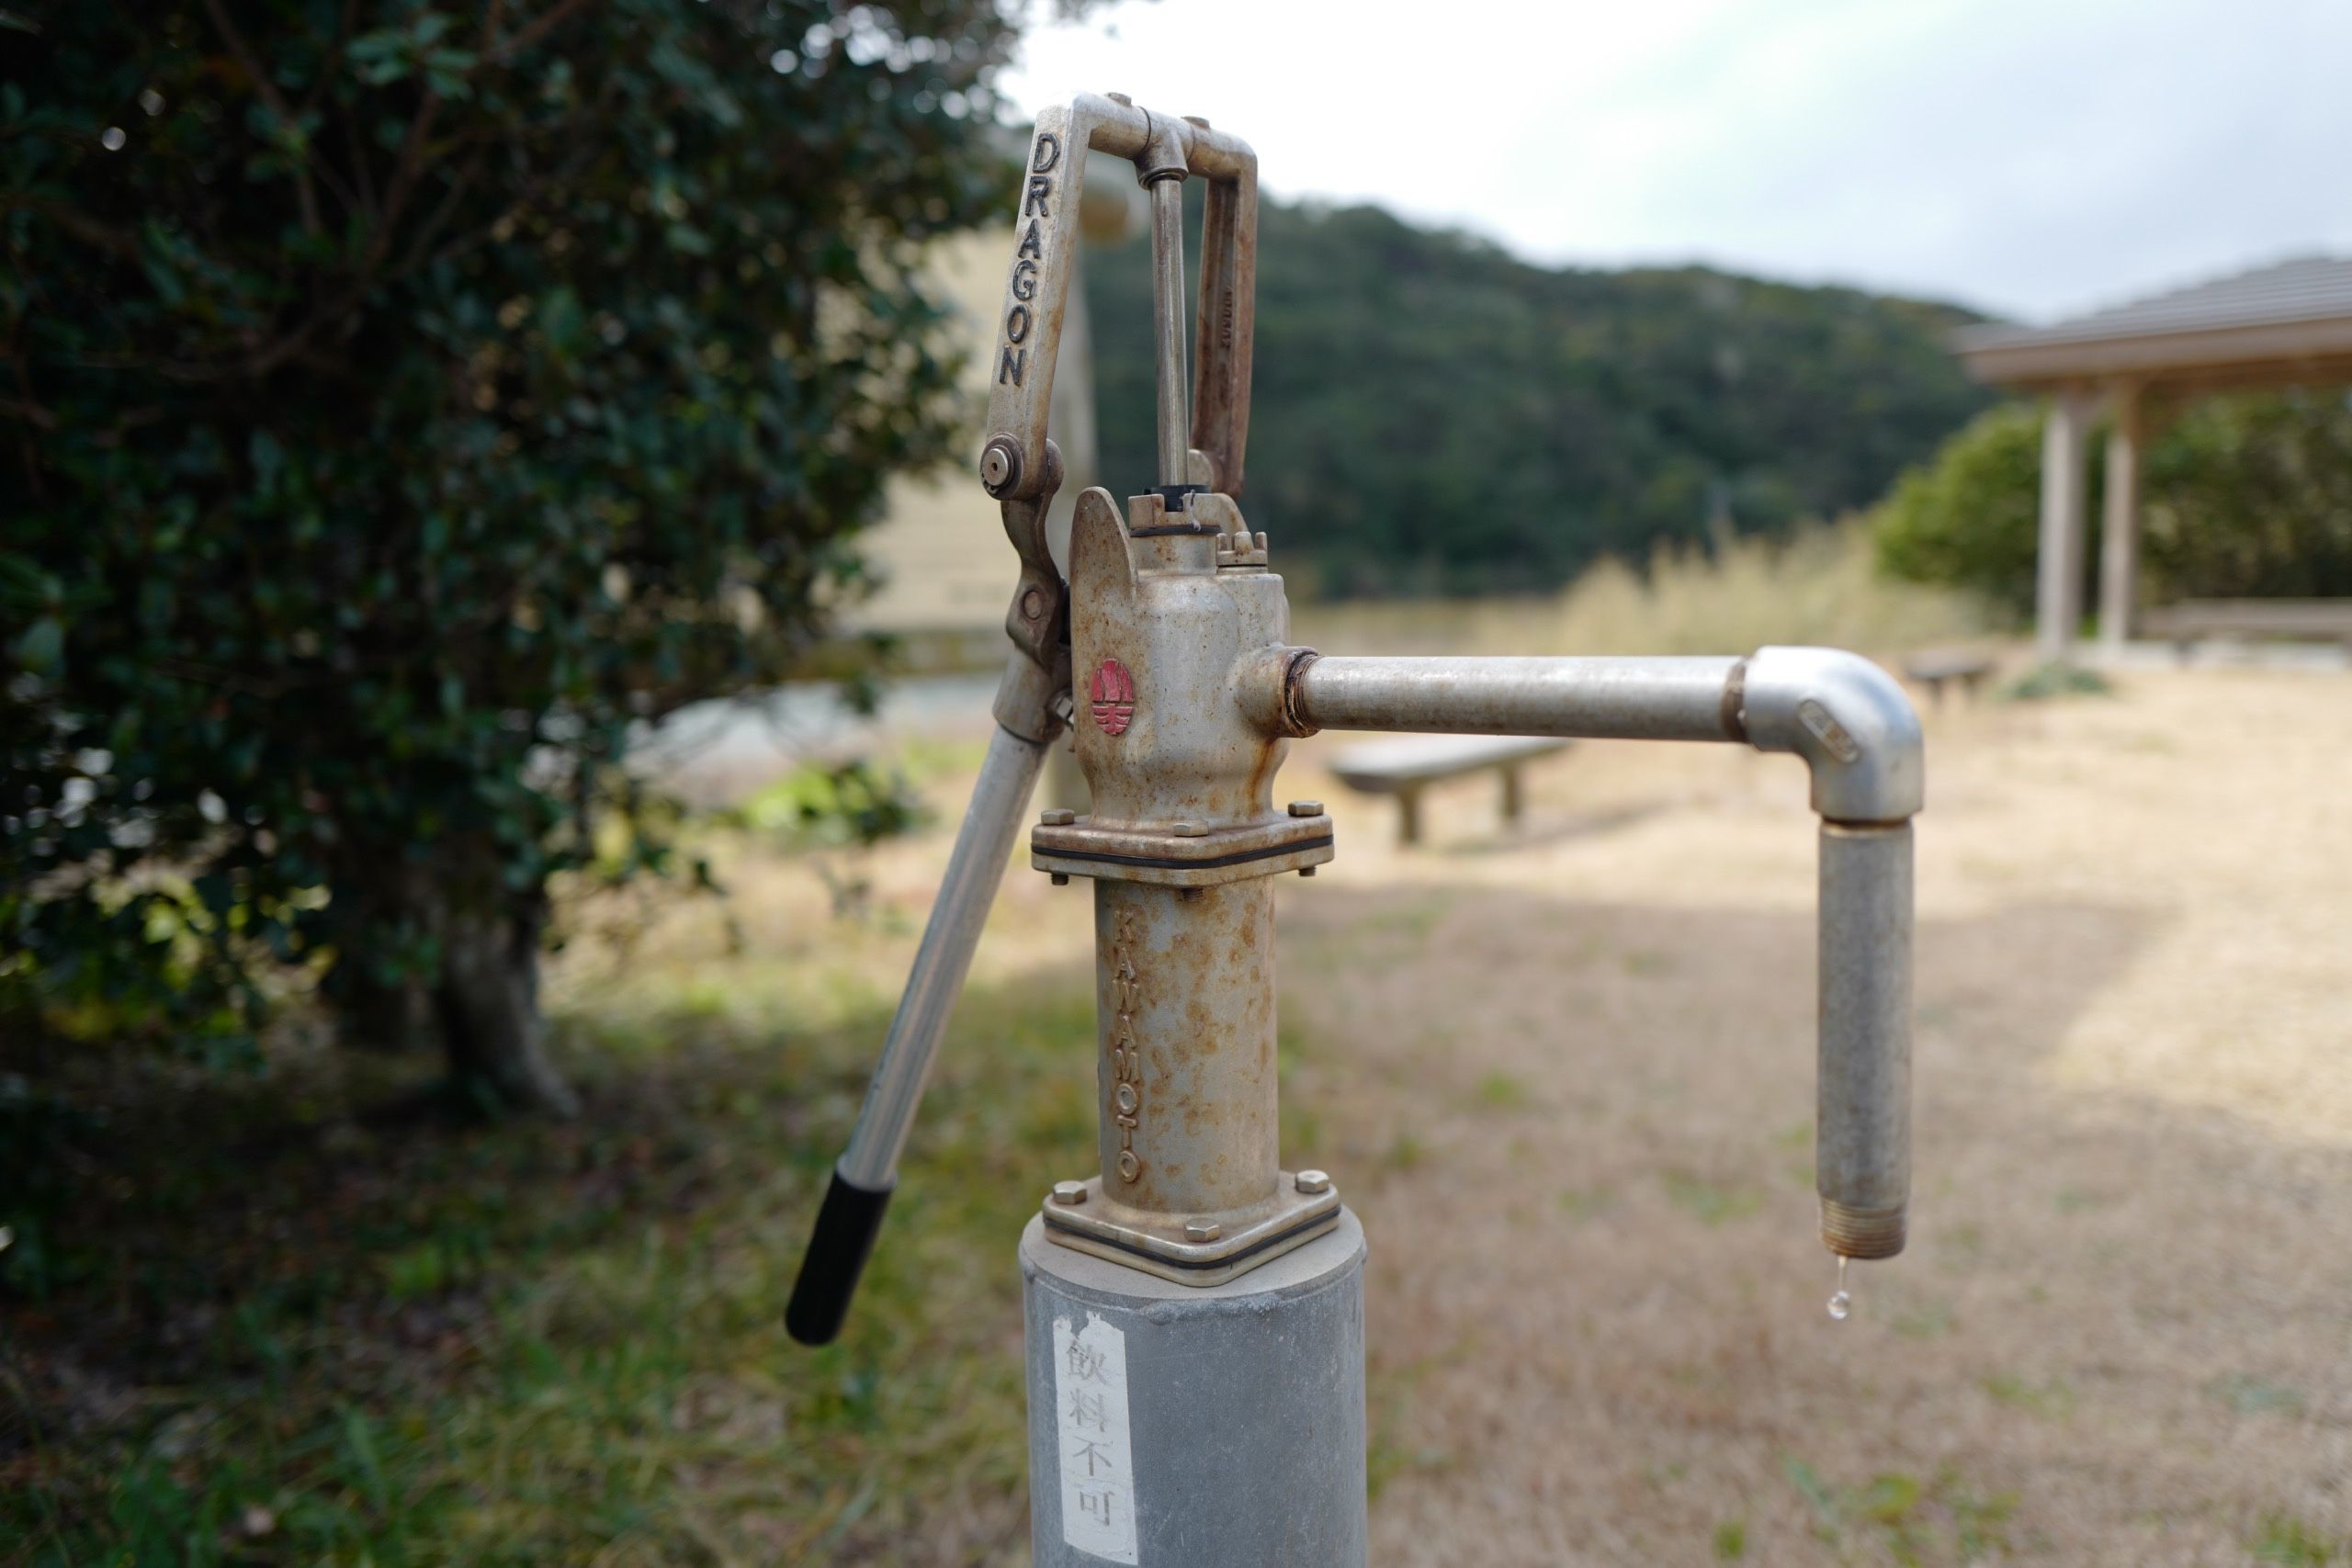 Water drips from an old-fashioned hand pump labeled DRAGON.